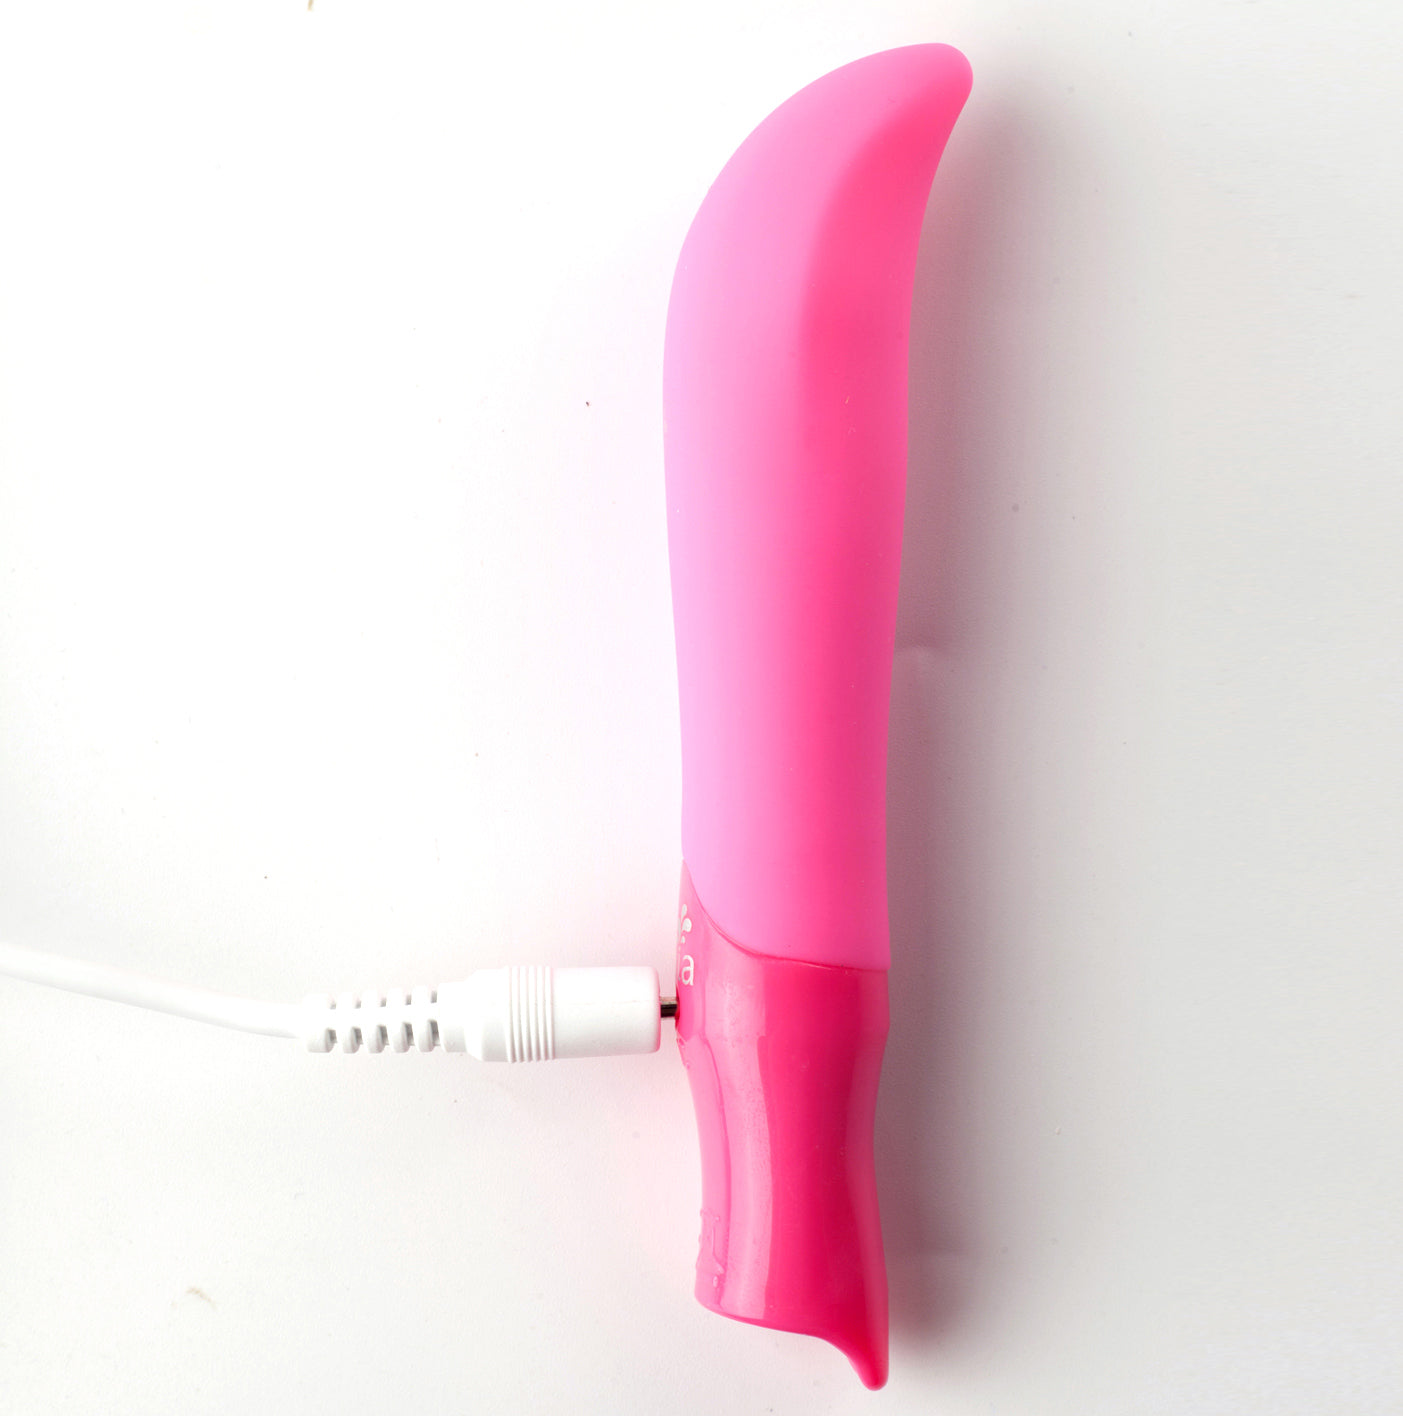 Maia Toys Maddie: Compact and Powerful G-Spot Vibrator